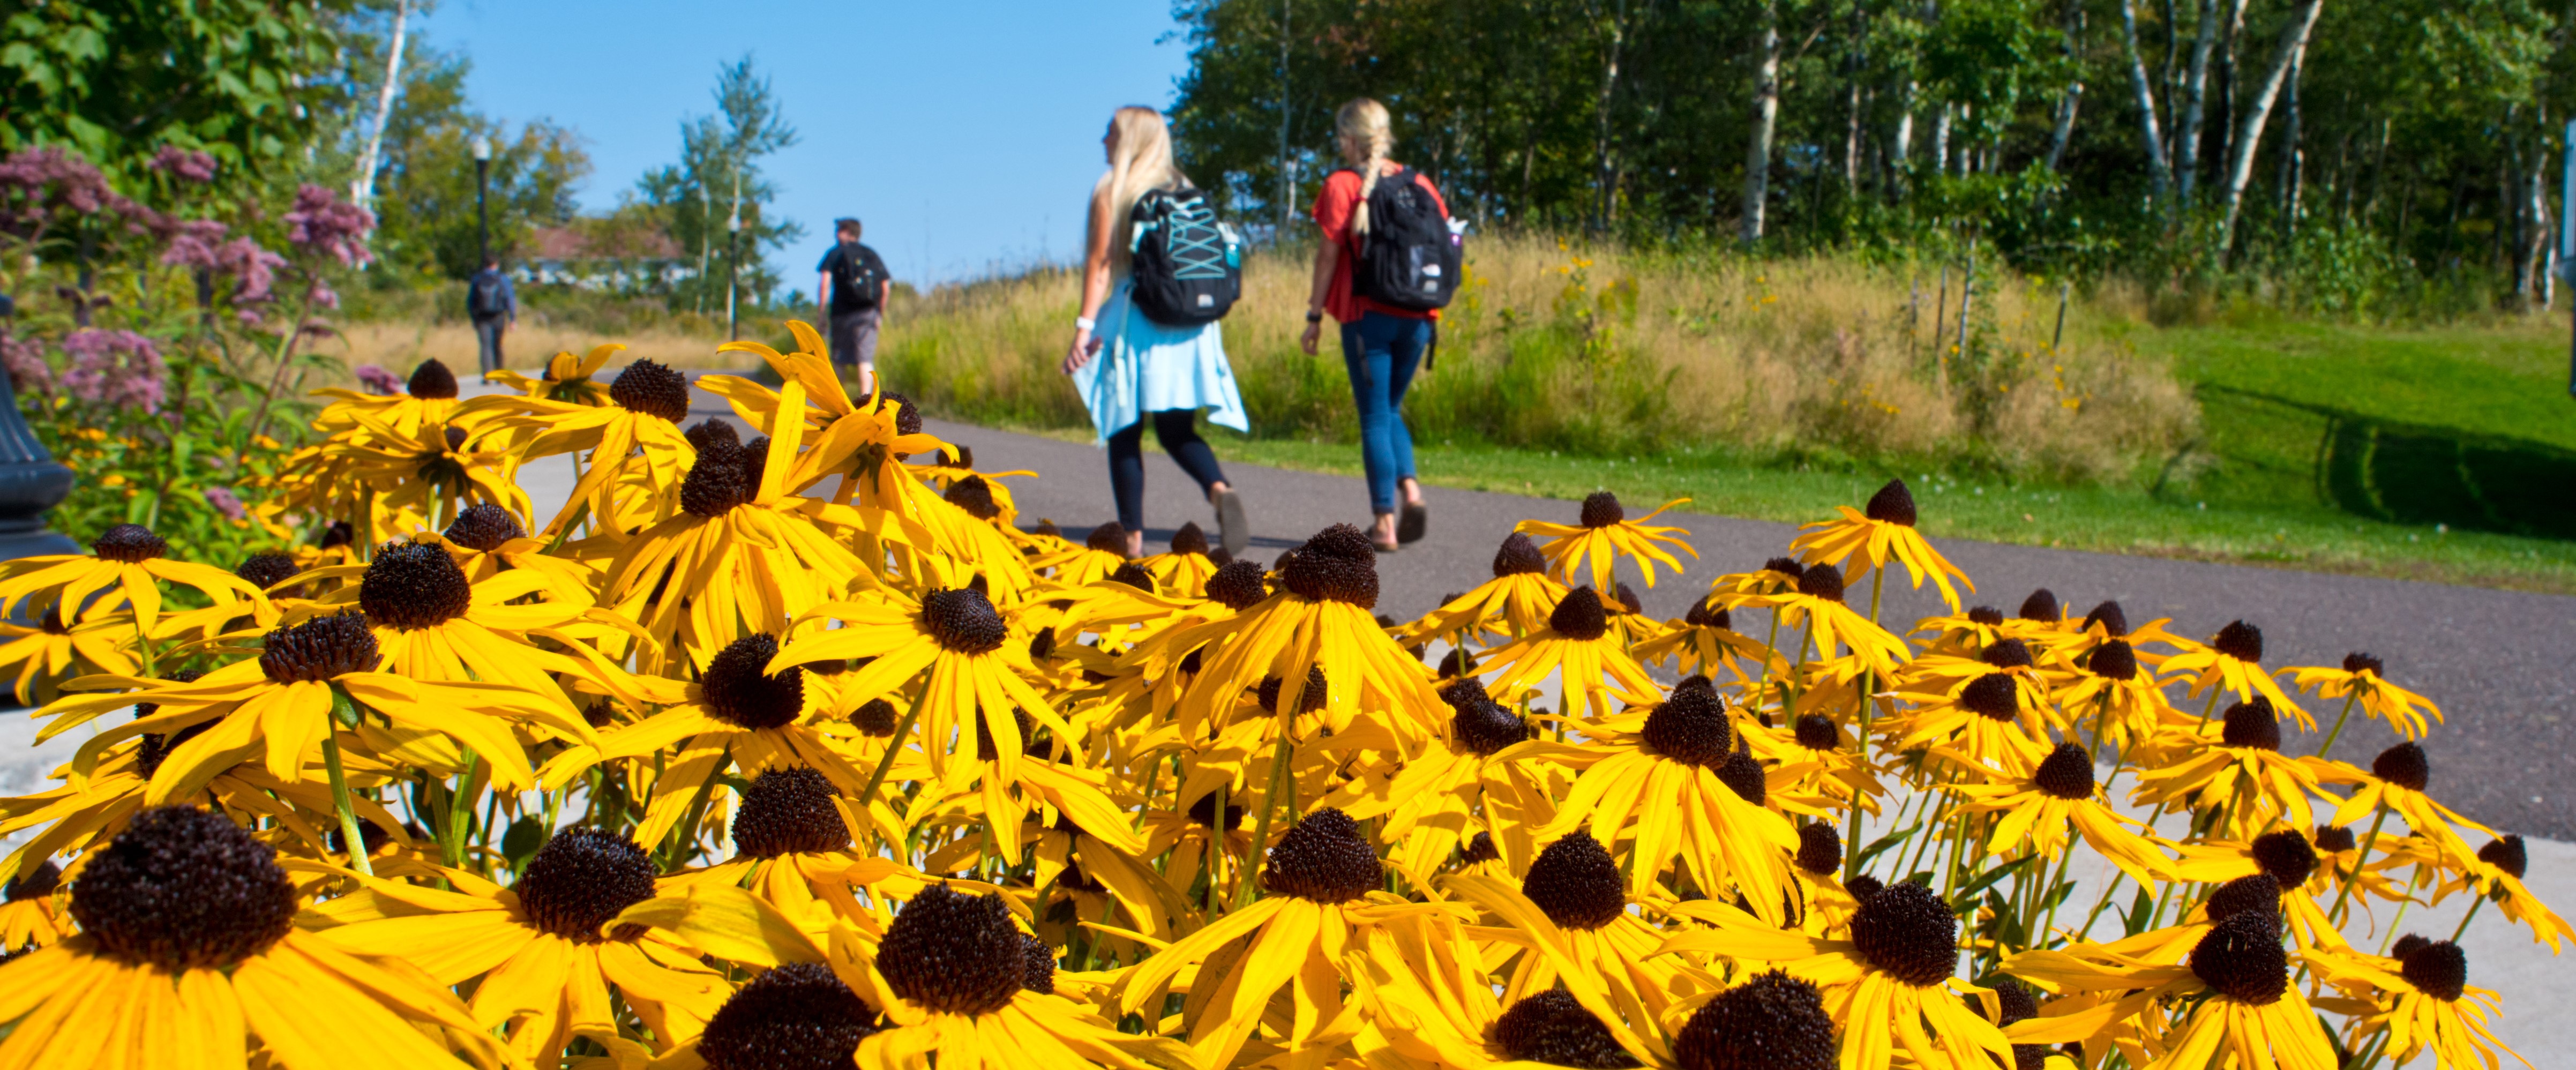 Students walking on a paved path in front of yellow flowers